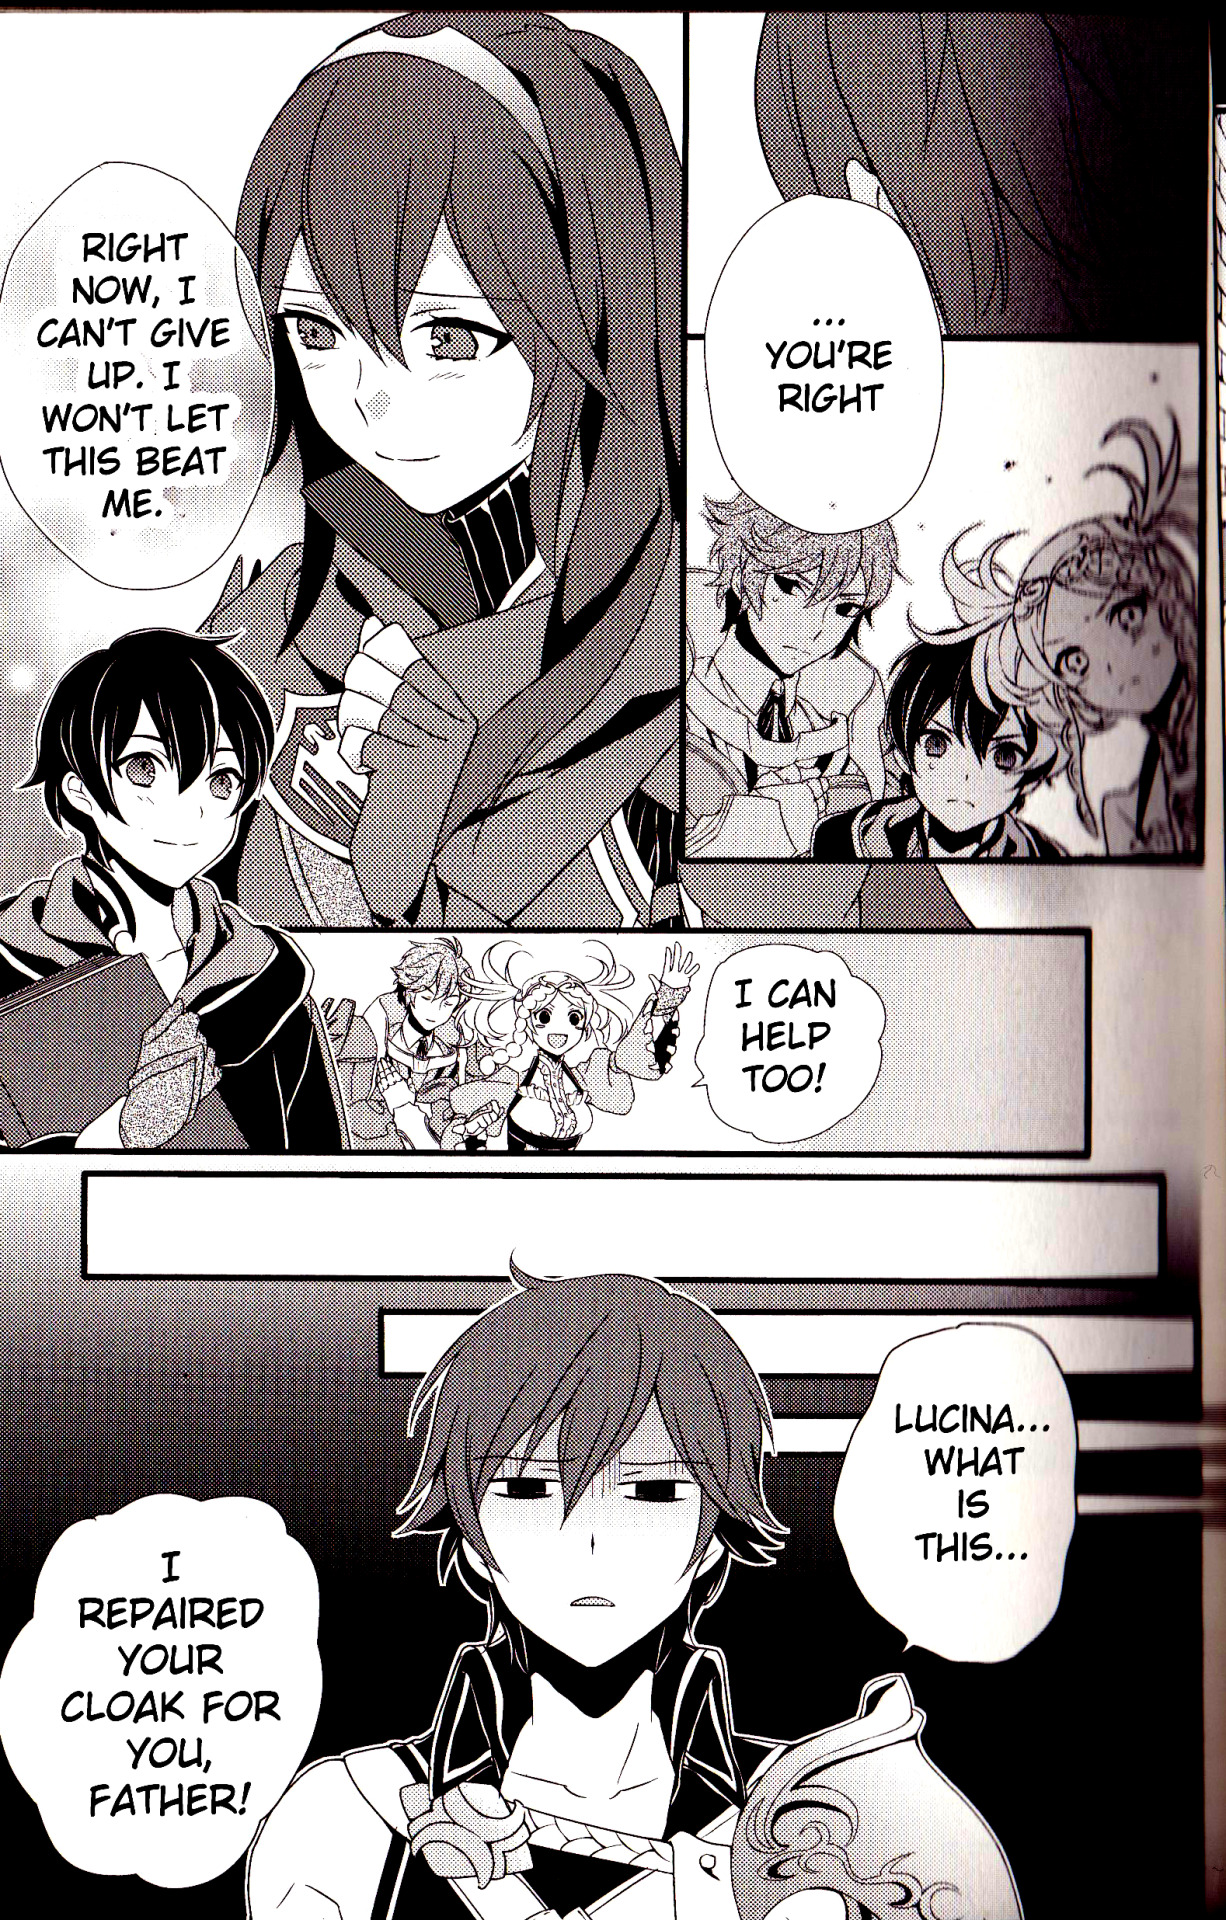 Fire Emblem Awakening: Comic Anthology Vol. 1 Ch. 3 Lucina's Respect for her Father (Artist